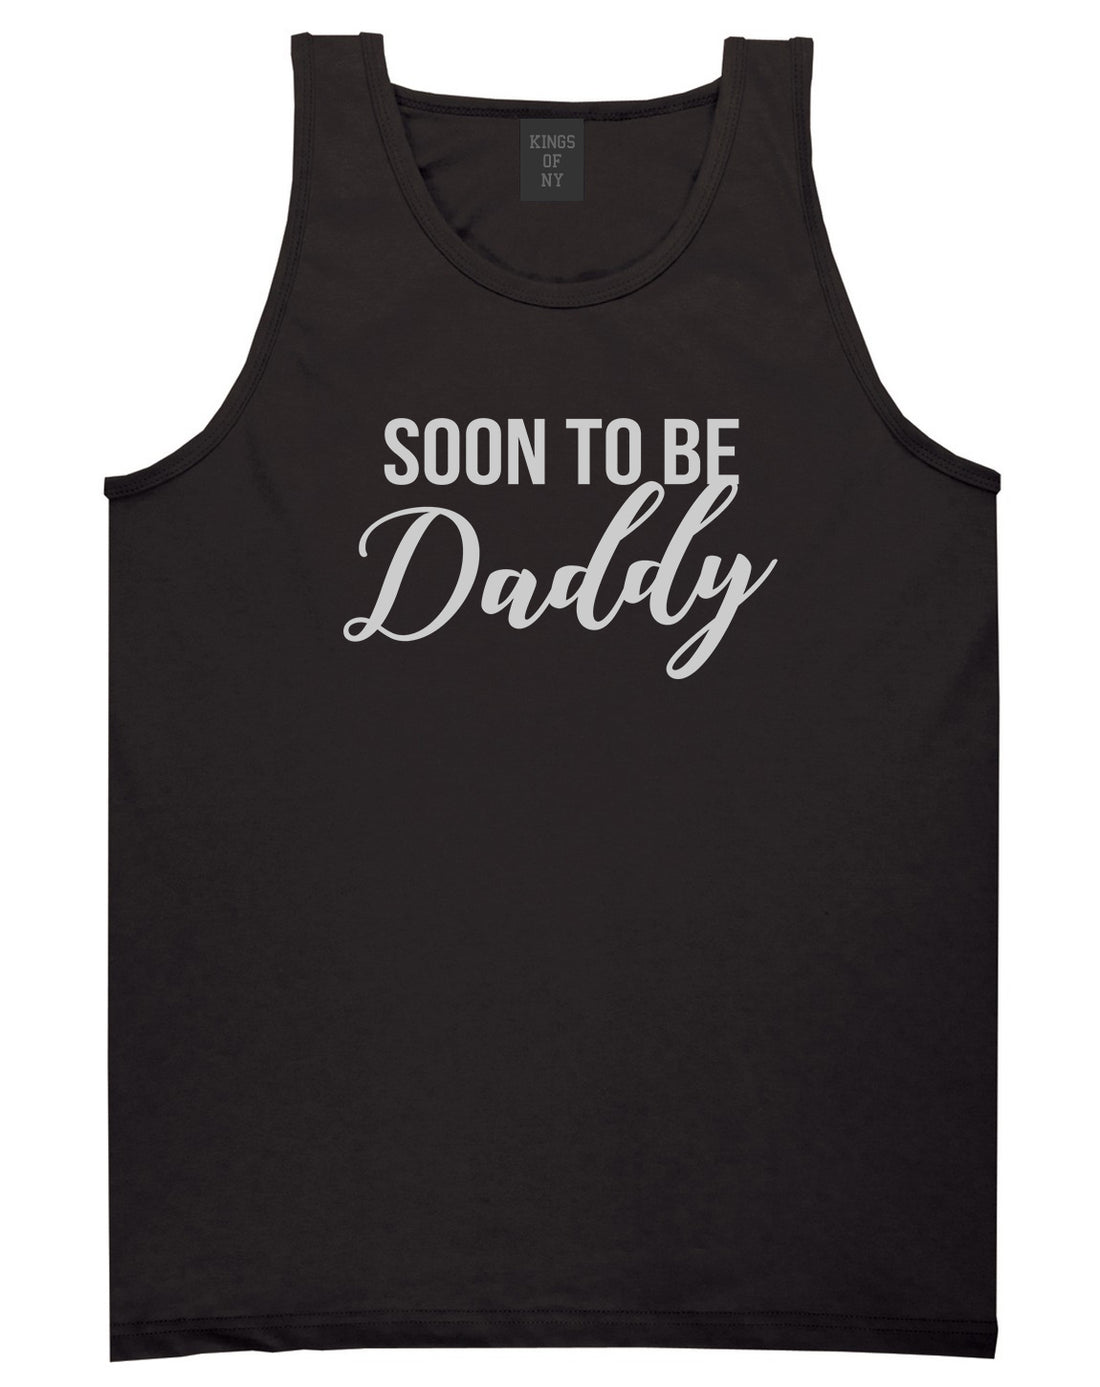 Soon To Be Daddy Pregnancy Announcement Mens Tank Top Shirt Black